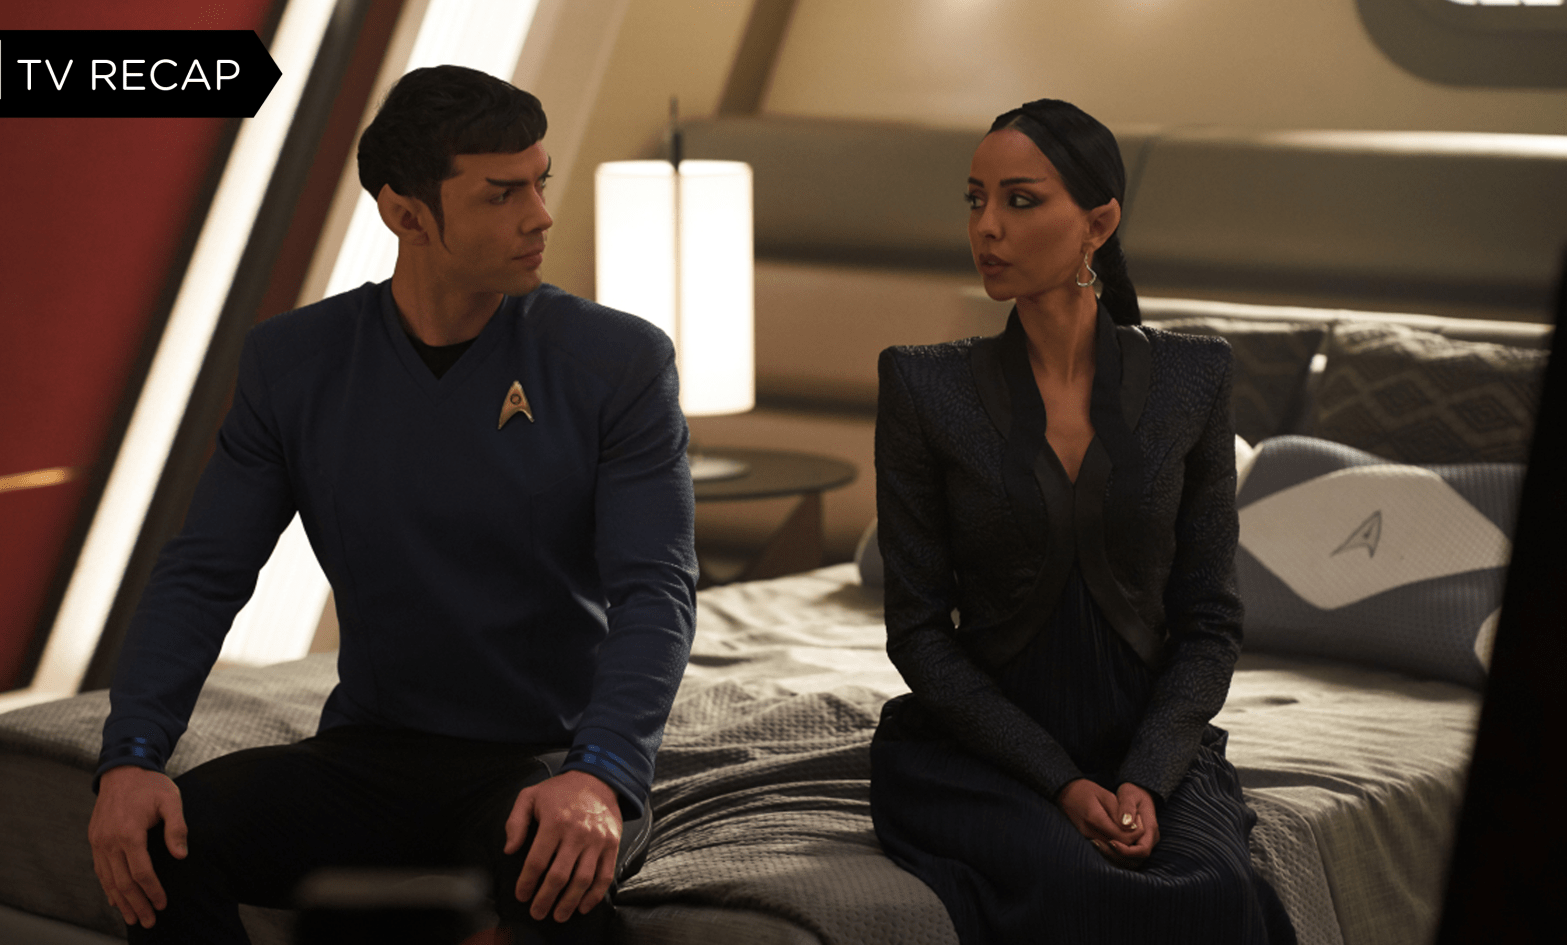 Sure, relationship drama — but check those cute Starfleet-issue pillowcases! (Image: Paramount)